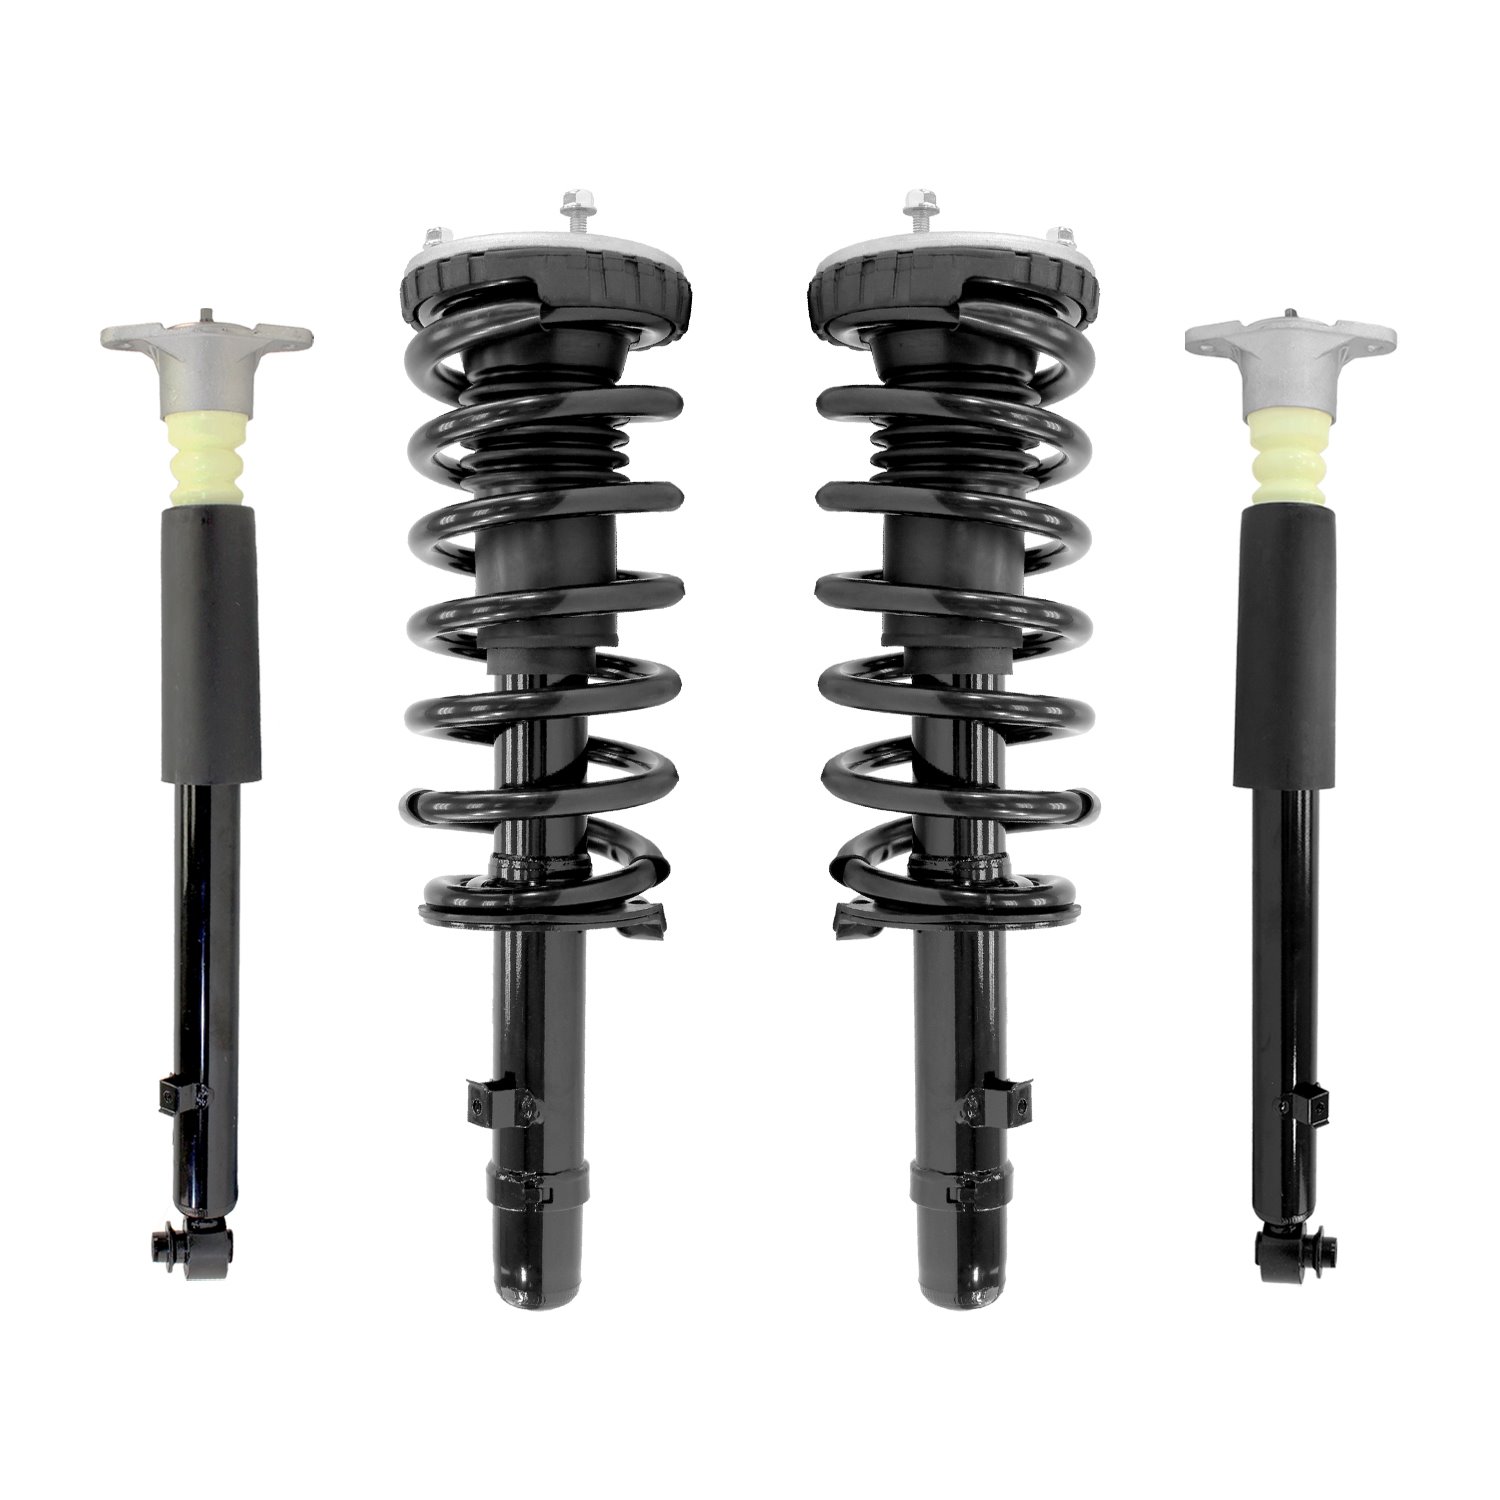 4-13591-259441-001 Front & Rear Complete Strut Assembly Shock Absorber Kit Fits Select Genesis G80, Hyundai Genesis